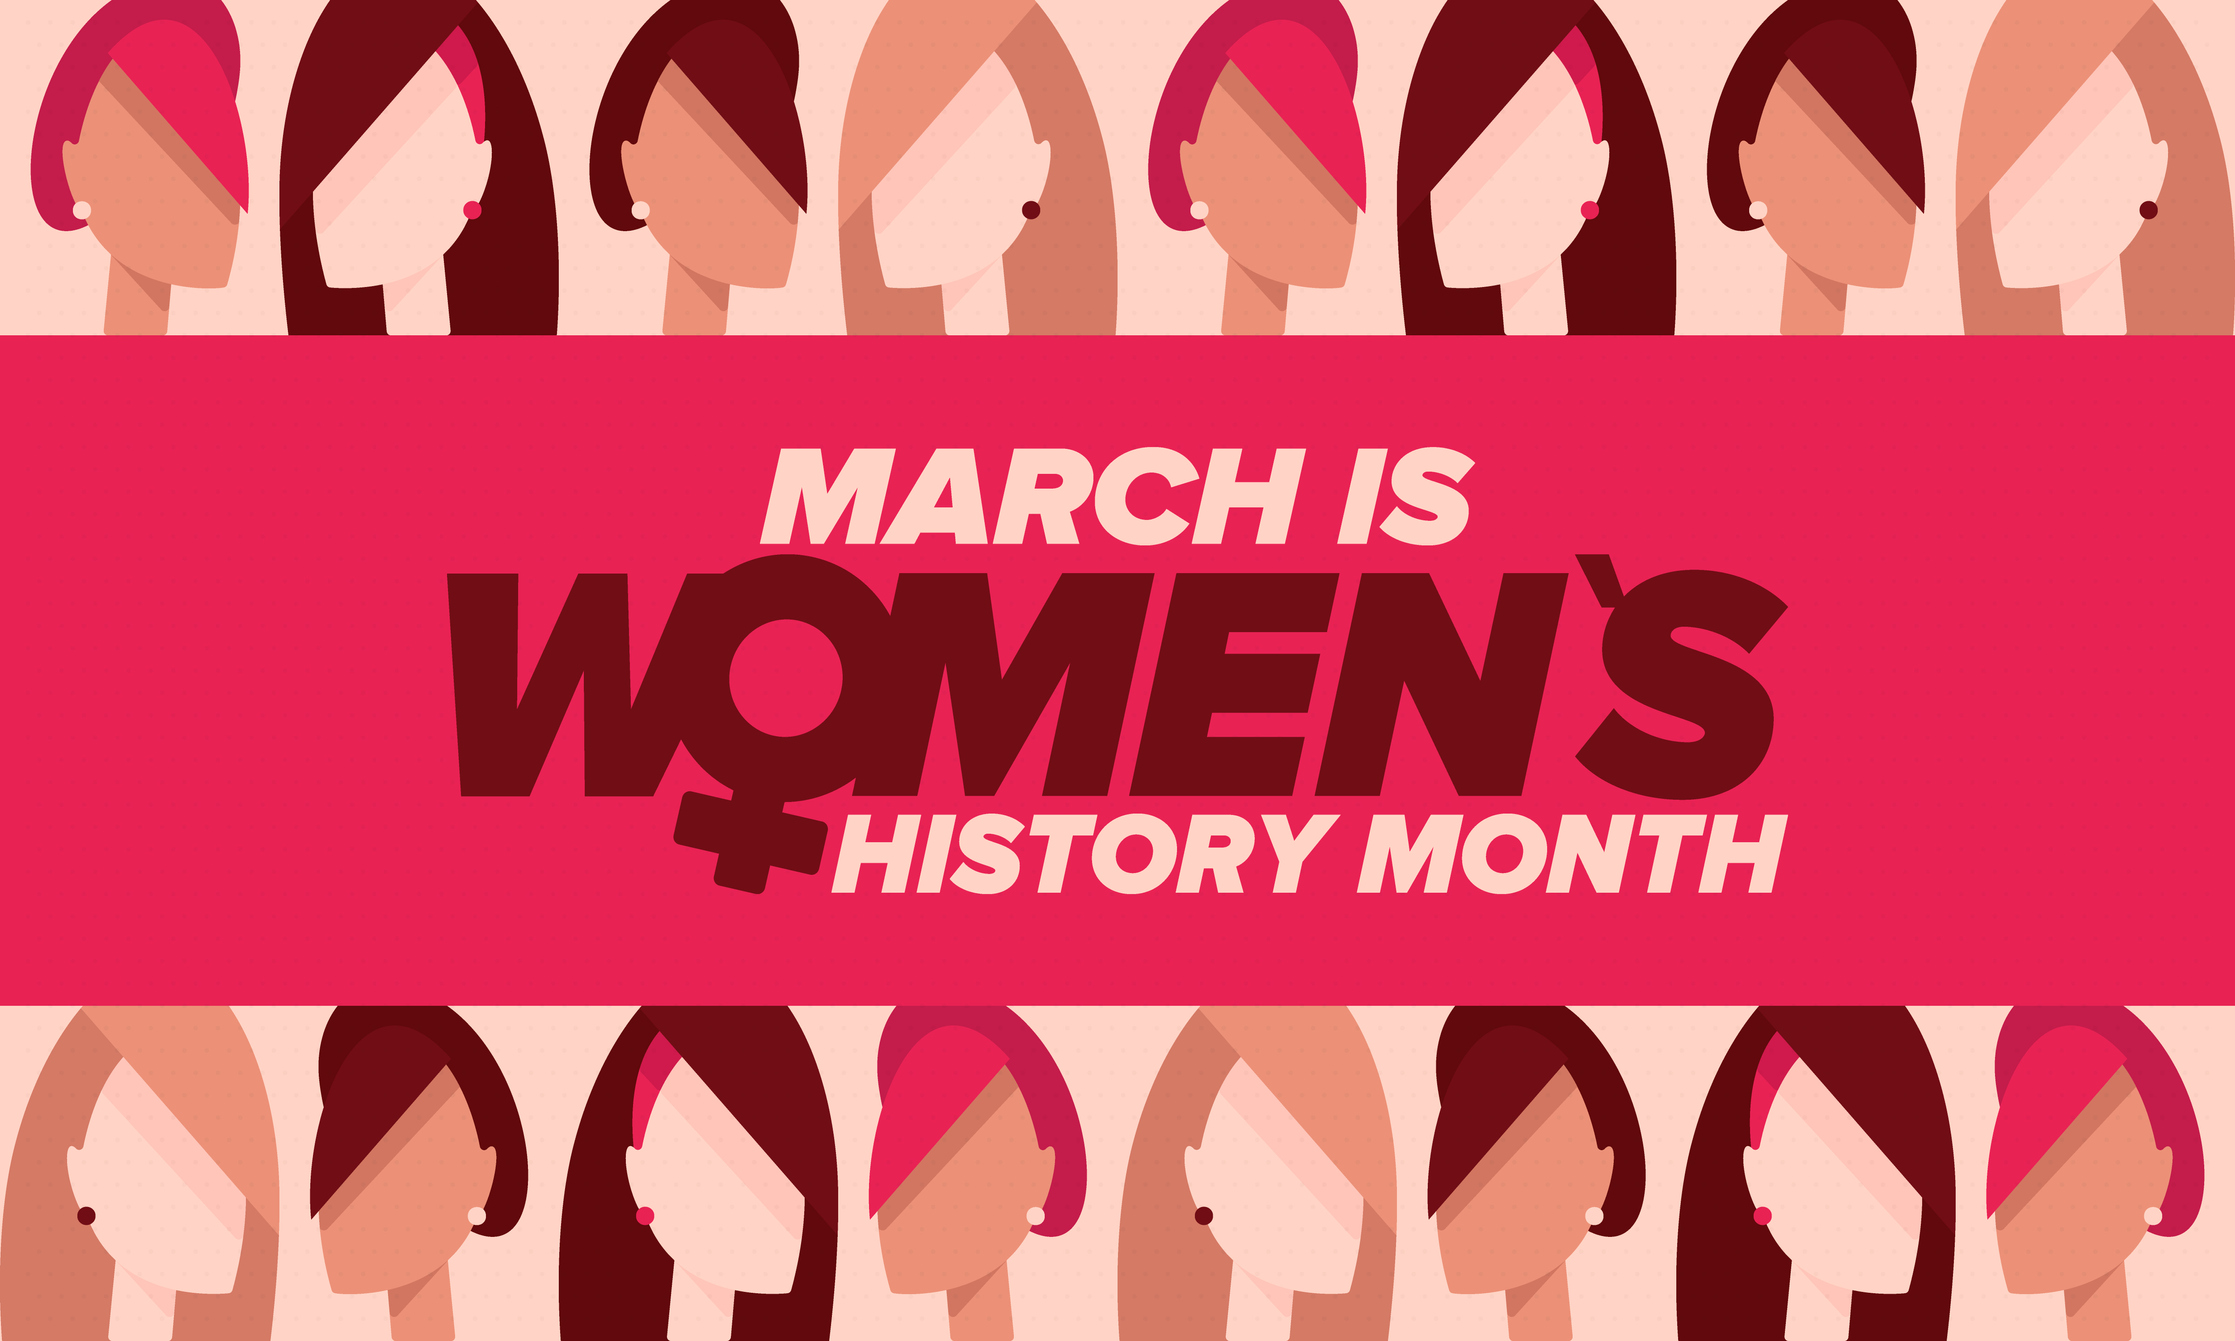 Celebrating Women's History Month in March 2021.